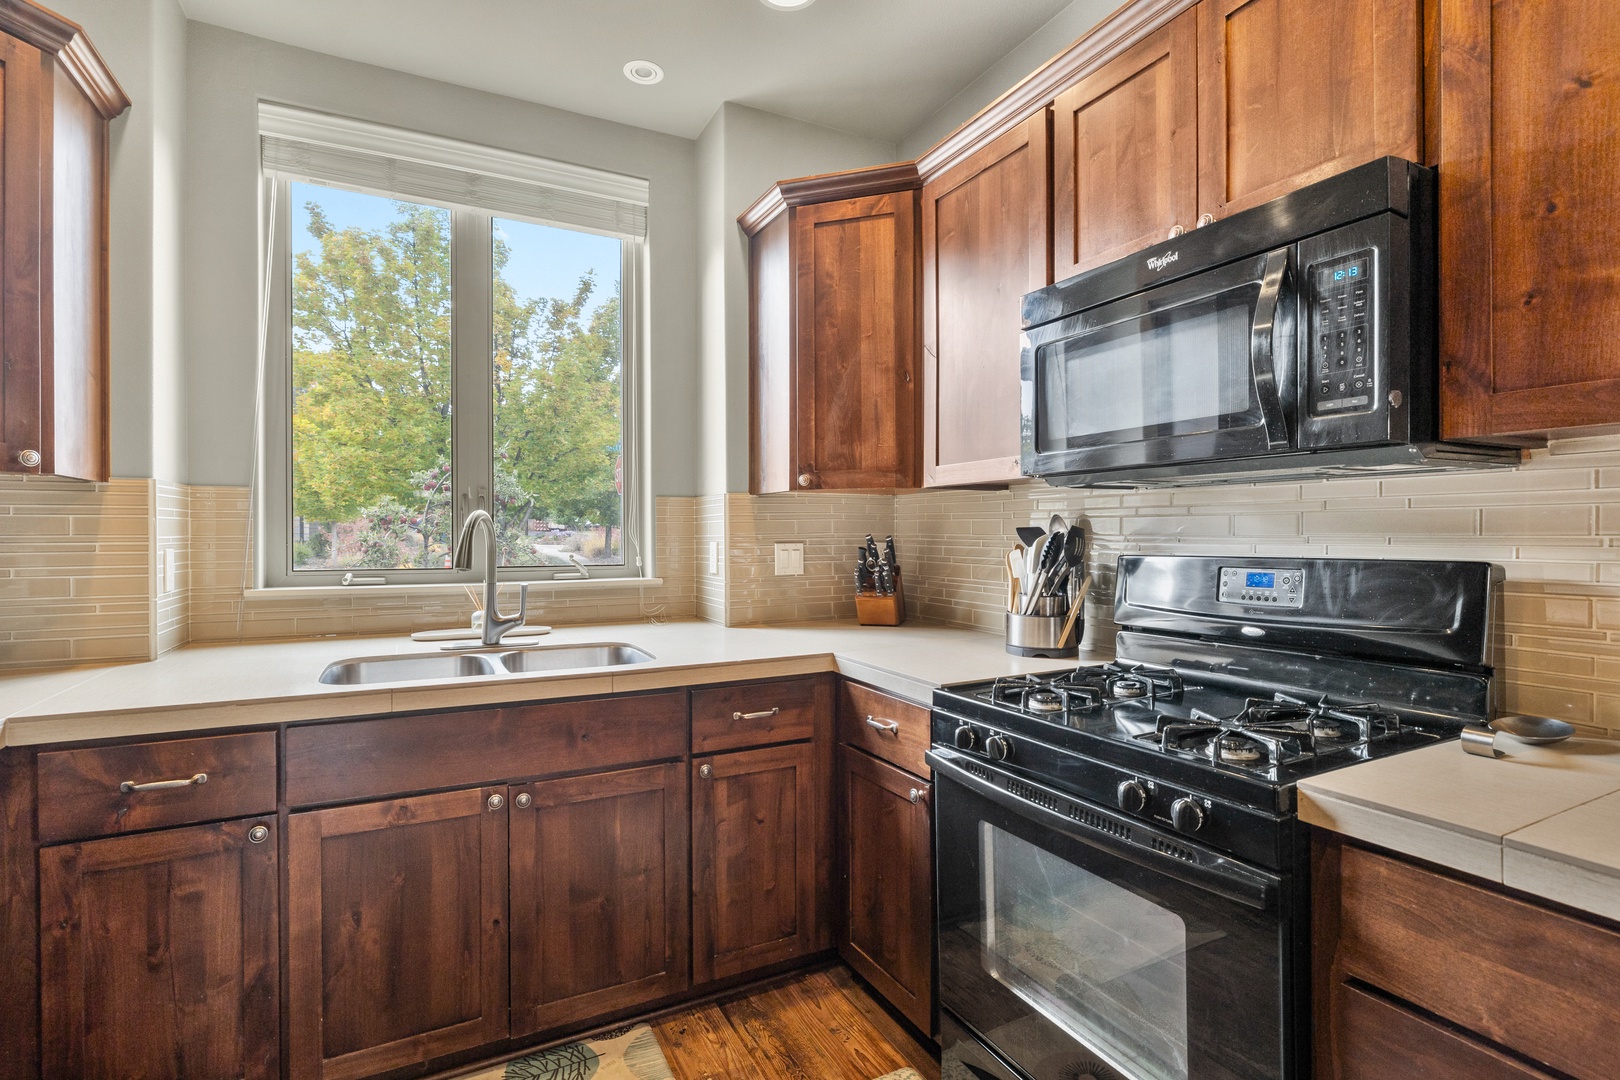 The kitchen offers ample storage/counter space & all the comforts of home